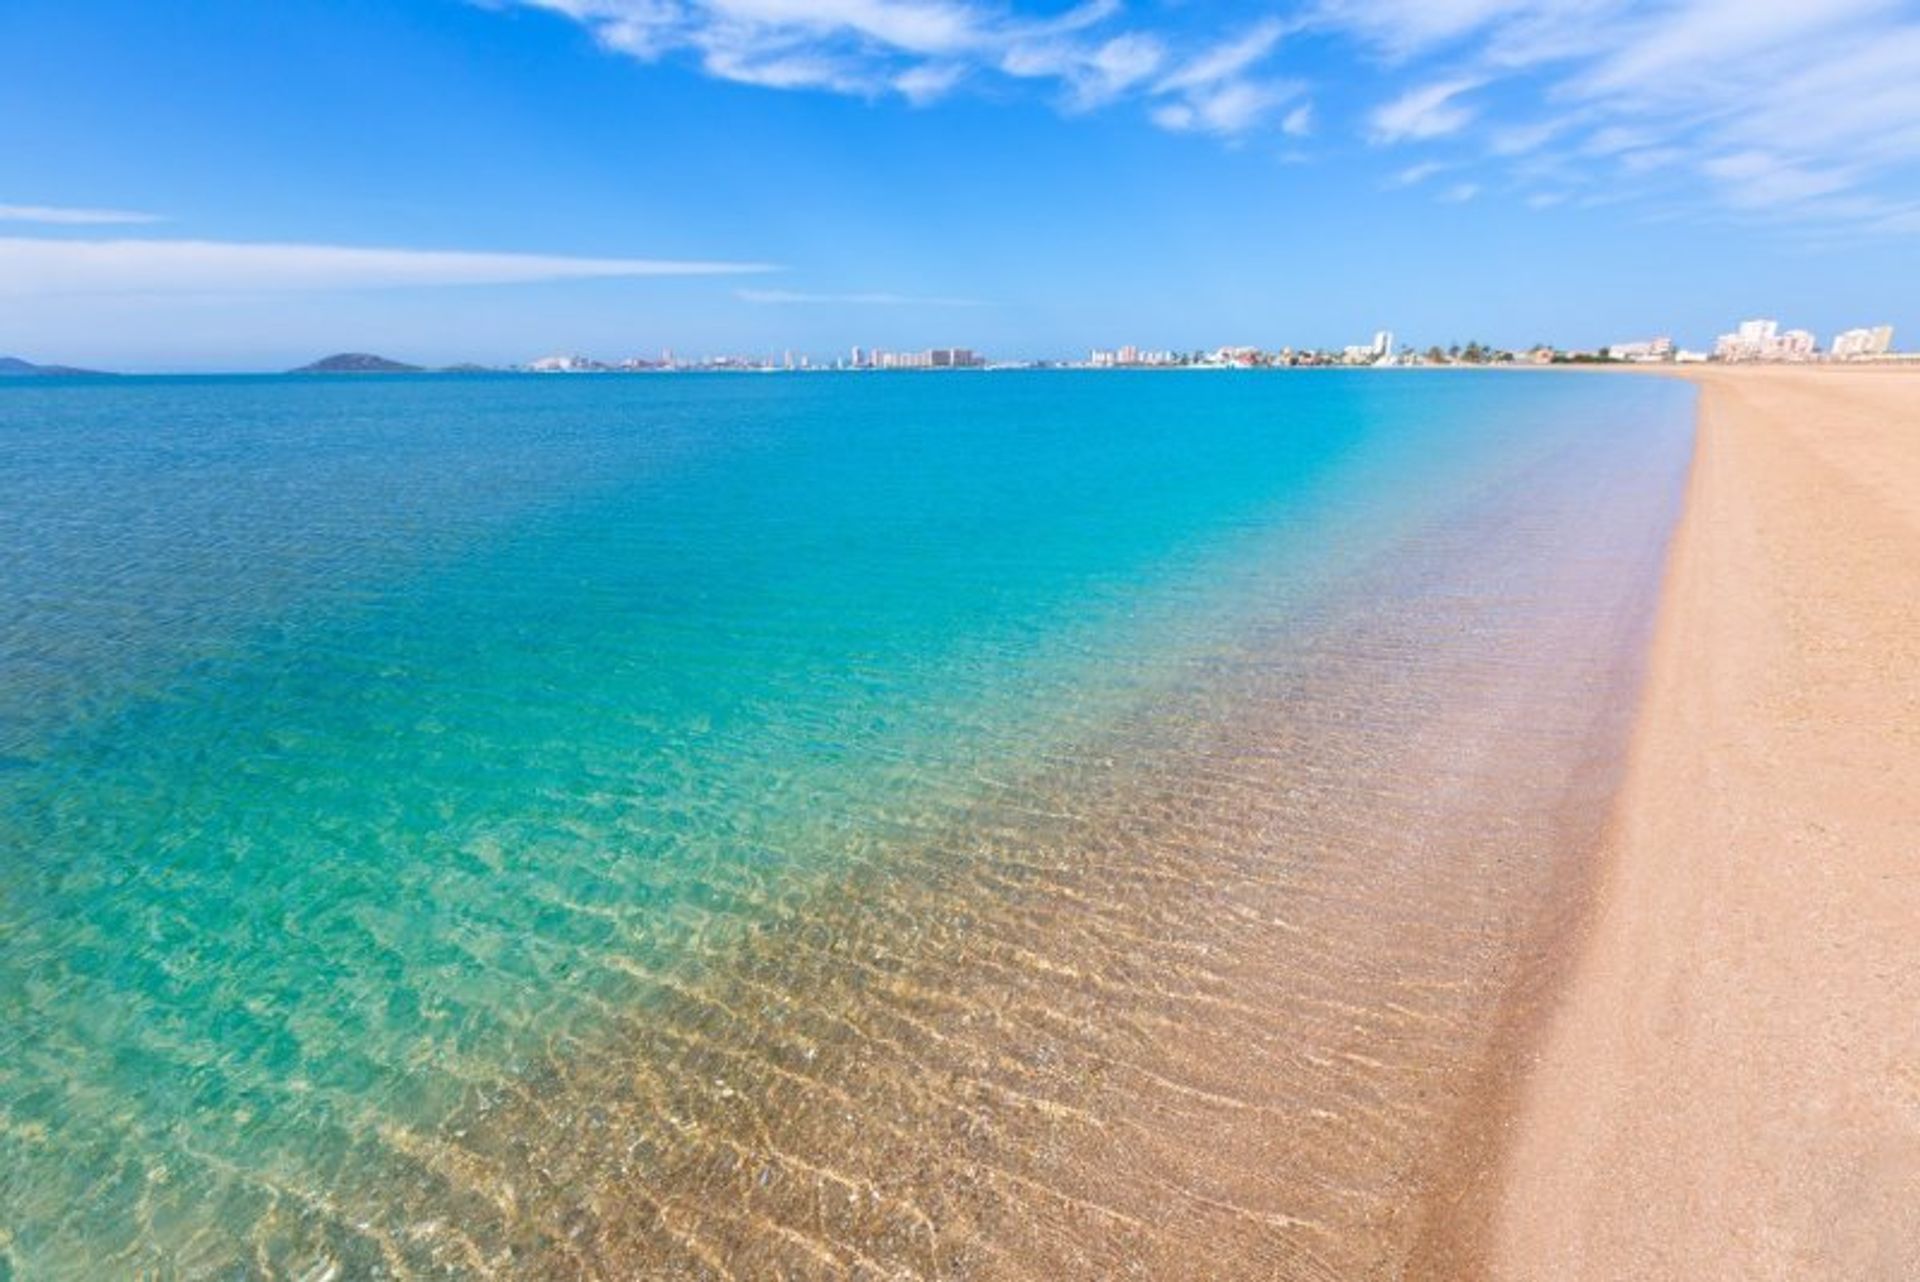 Boasting breathtaking golden sands and crystal clear waters, Playa Paraiso in Mar Menor lives up to its name